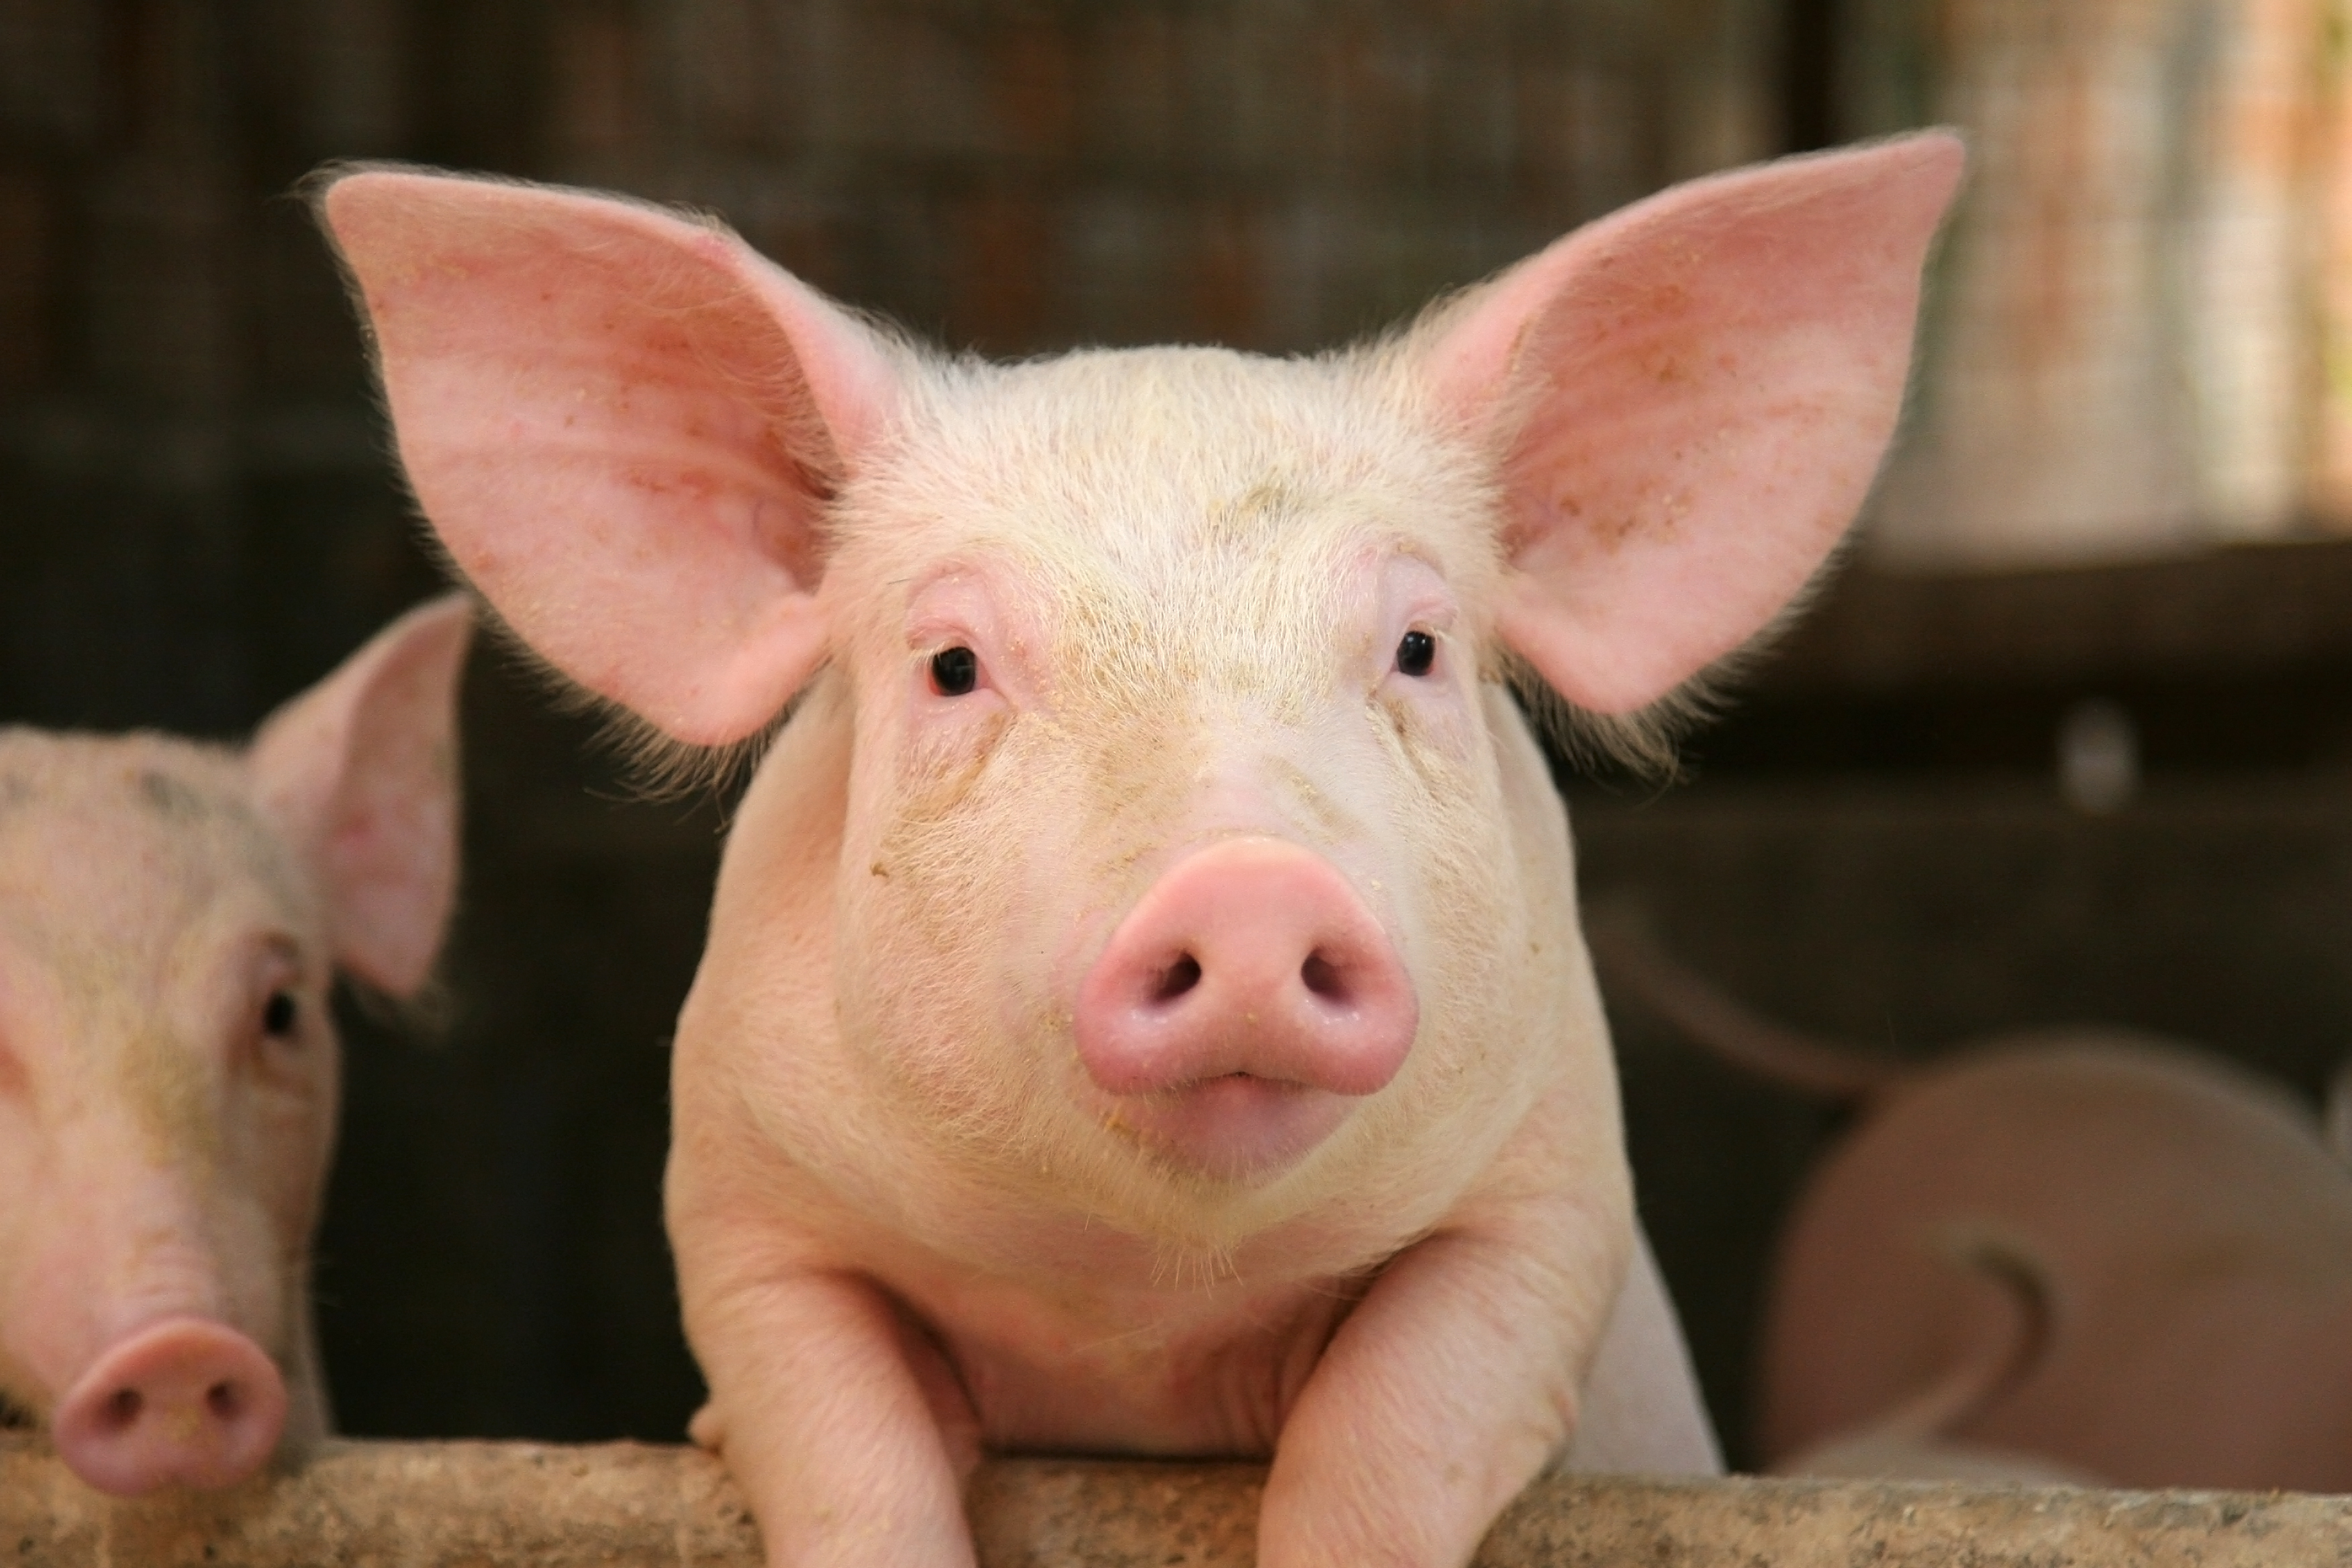 A cute piglet faces the camera with another piglet partially visible in the background